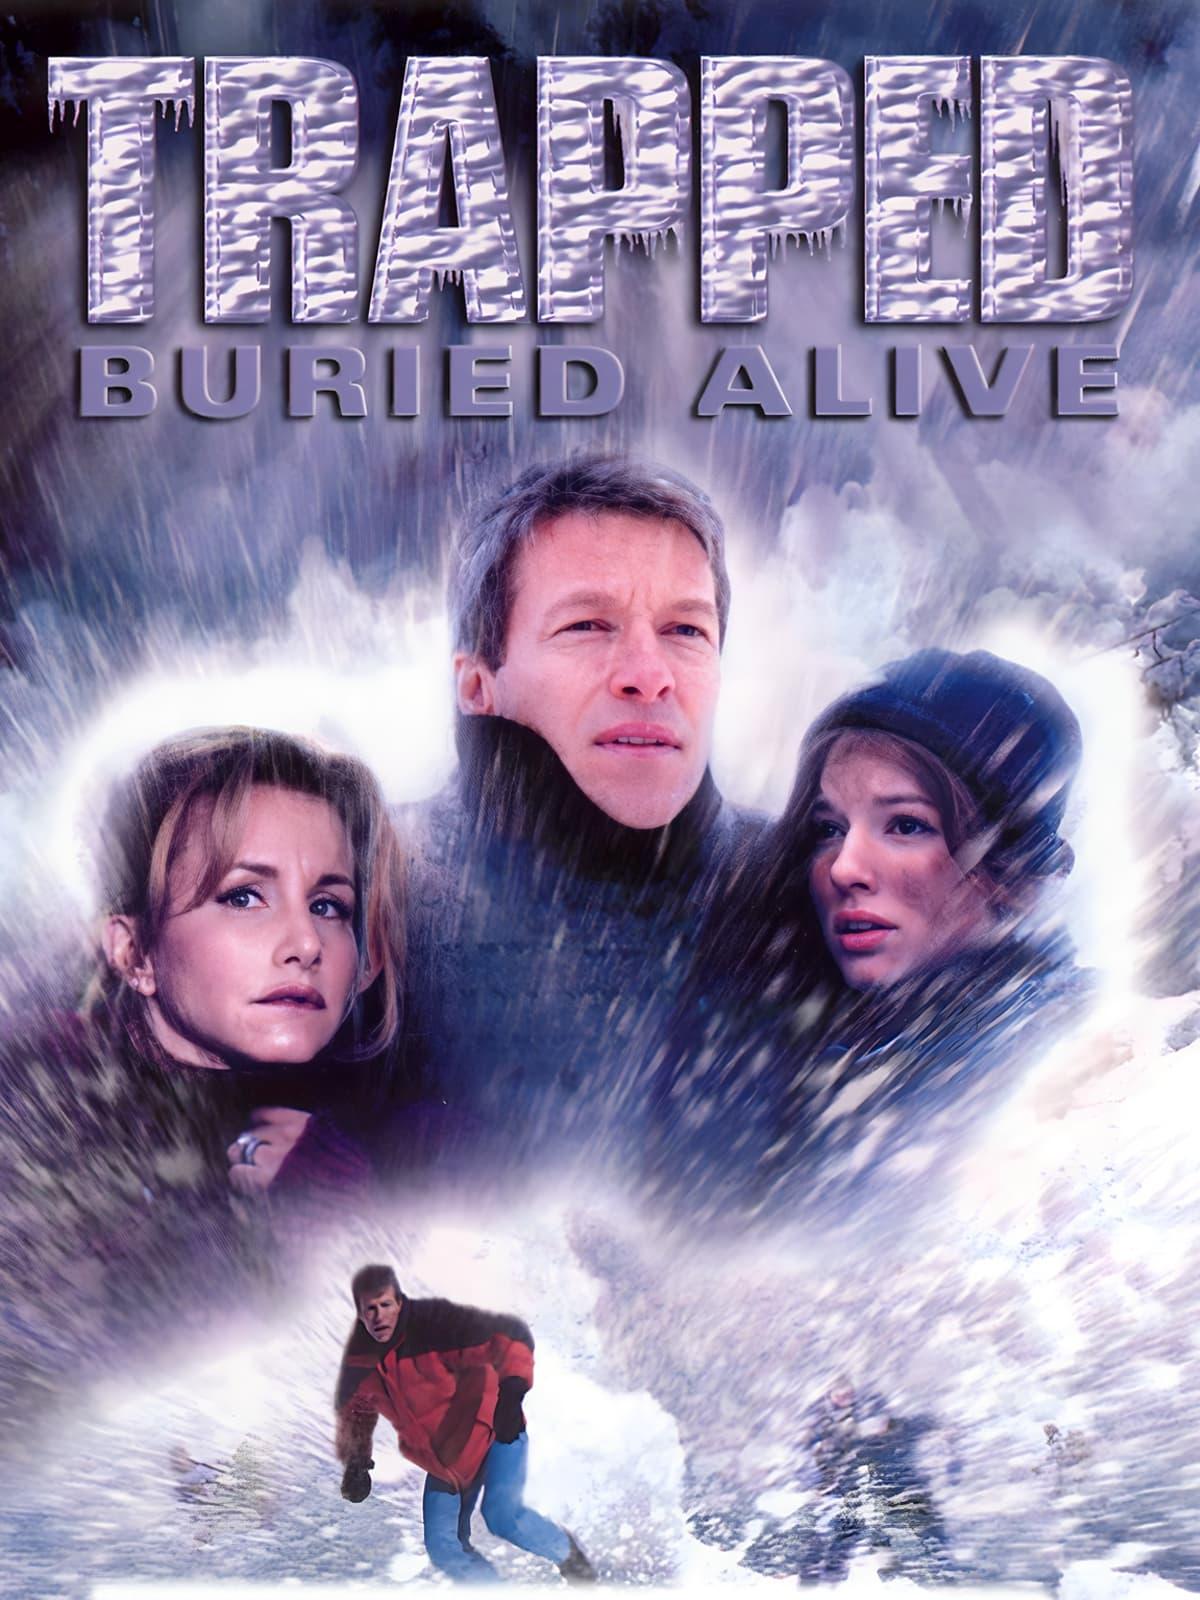 Trapped: Buried Alive poster